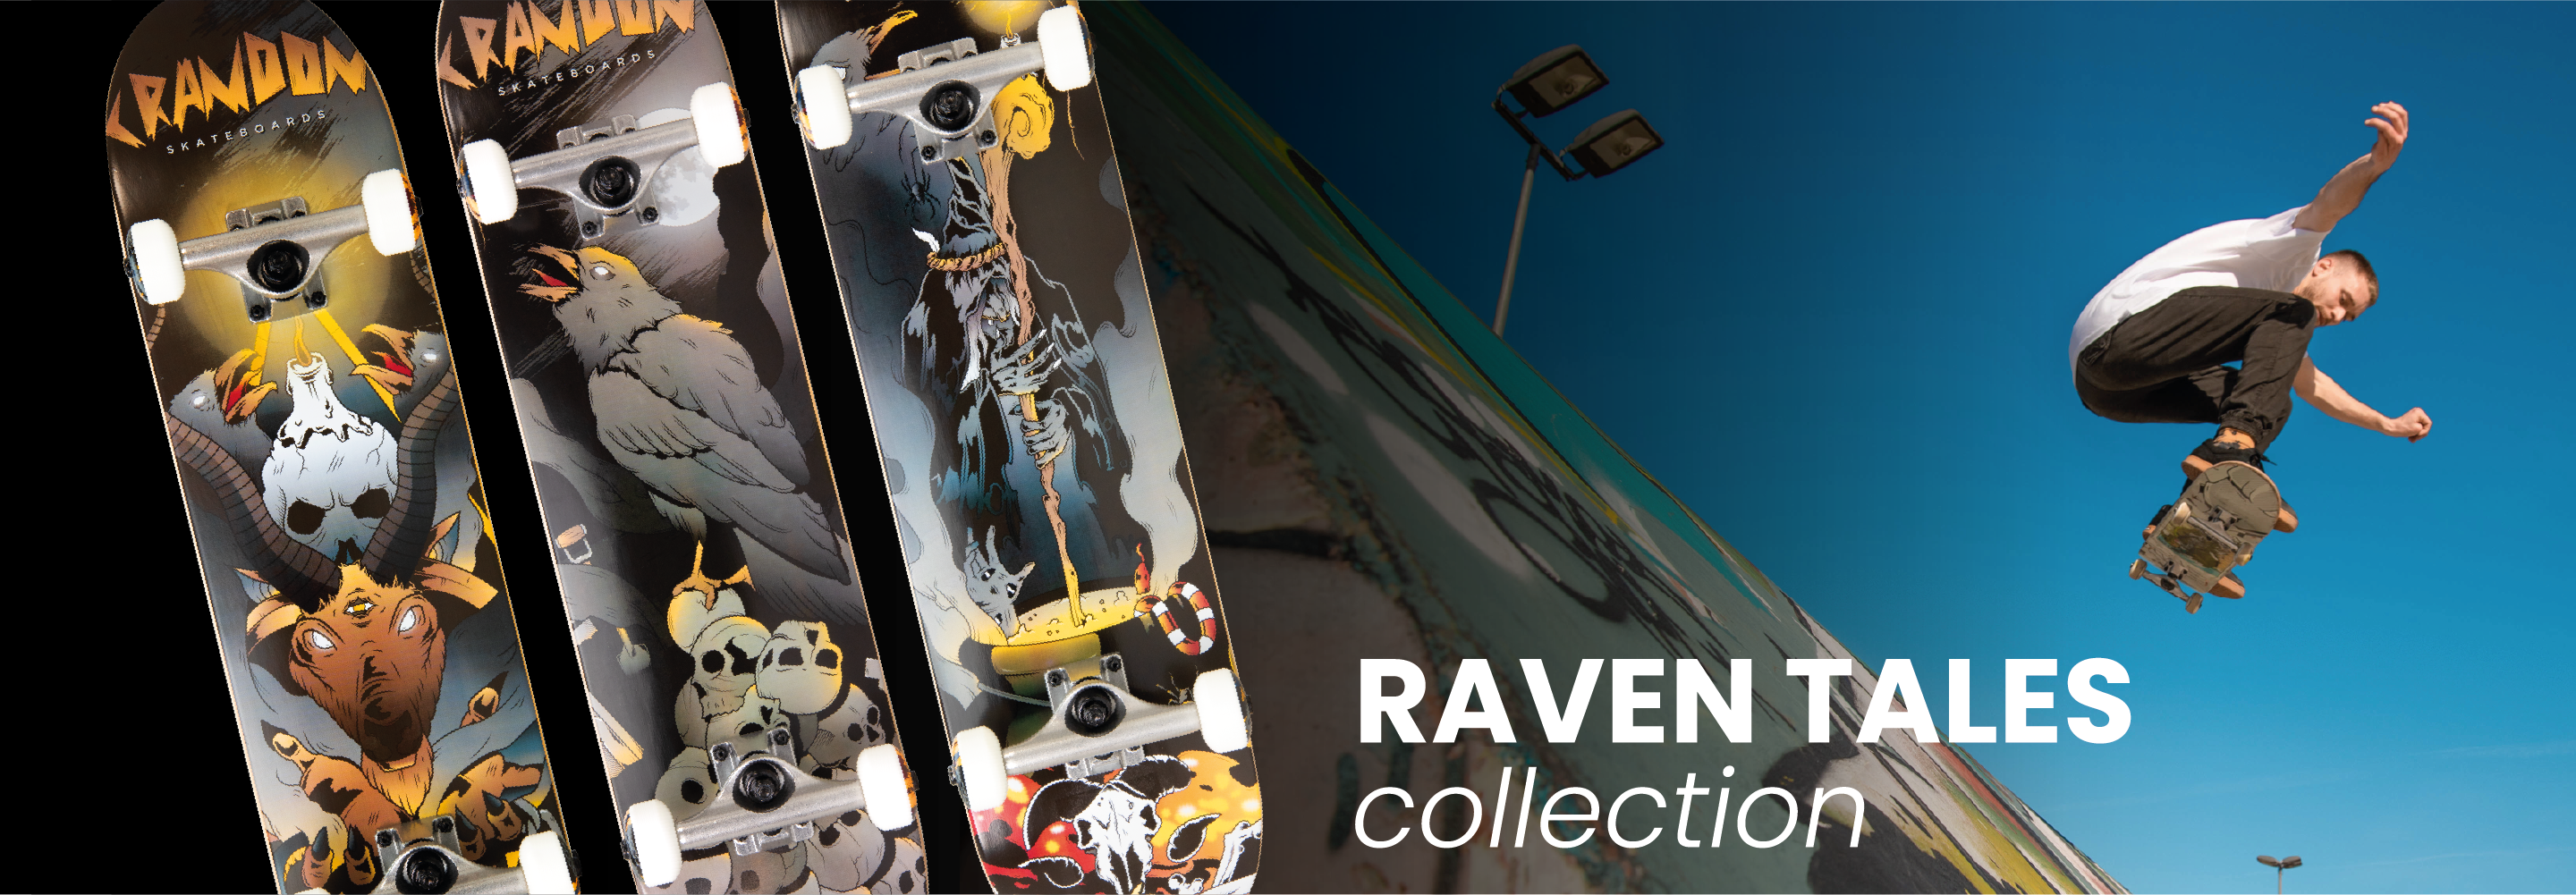 Raven Tales collection banner